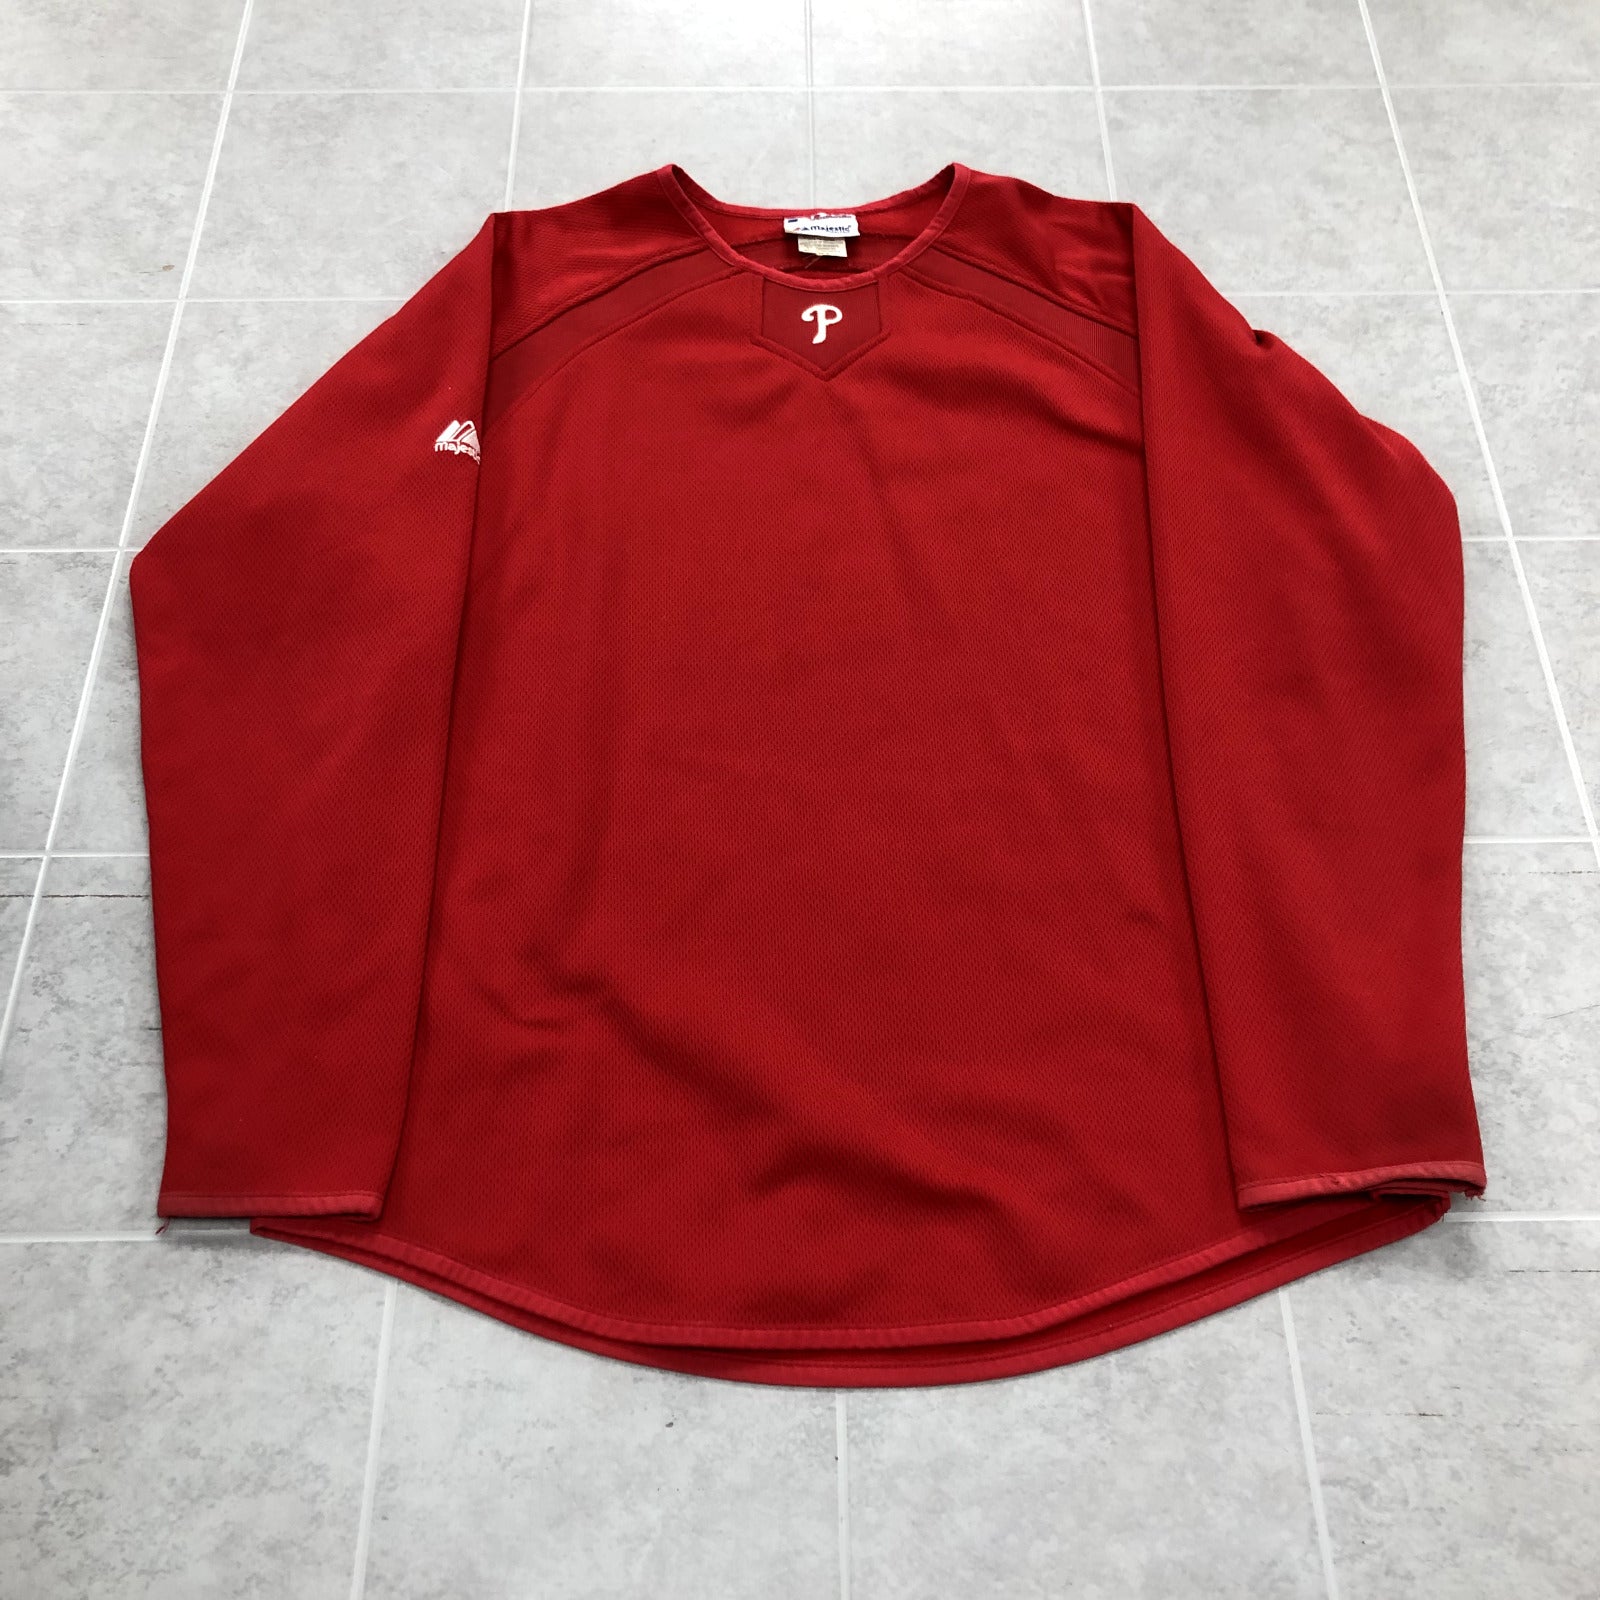 Vintage MLB x Majestic Red Long Sleeve Phillys Active T-shirt Adult Size M